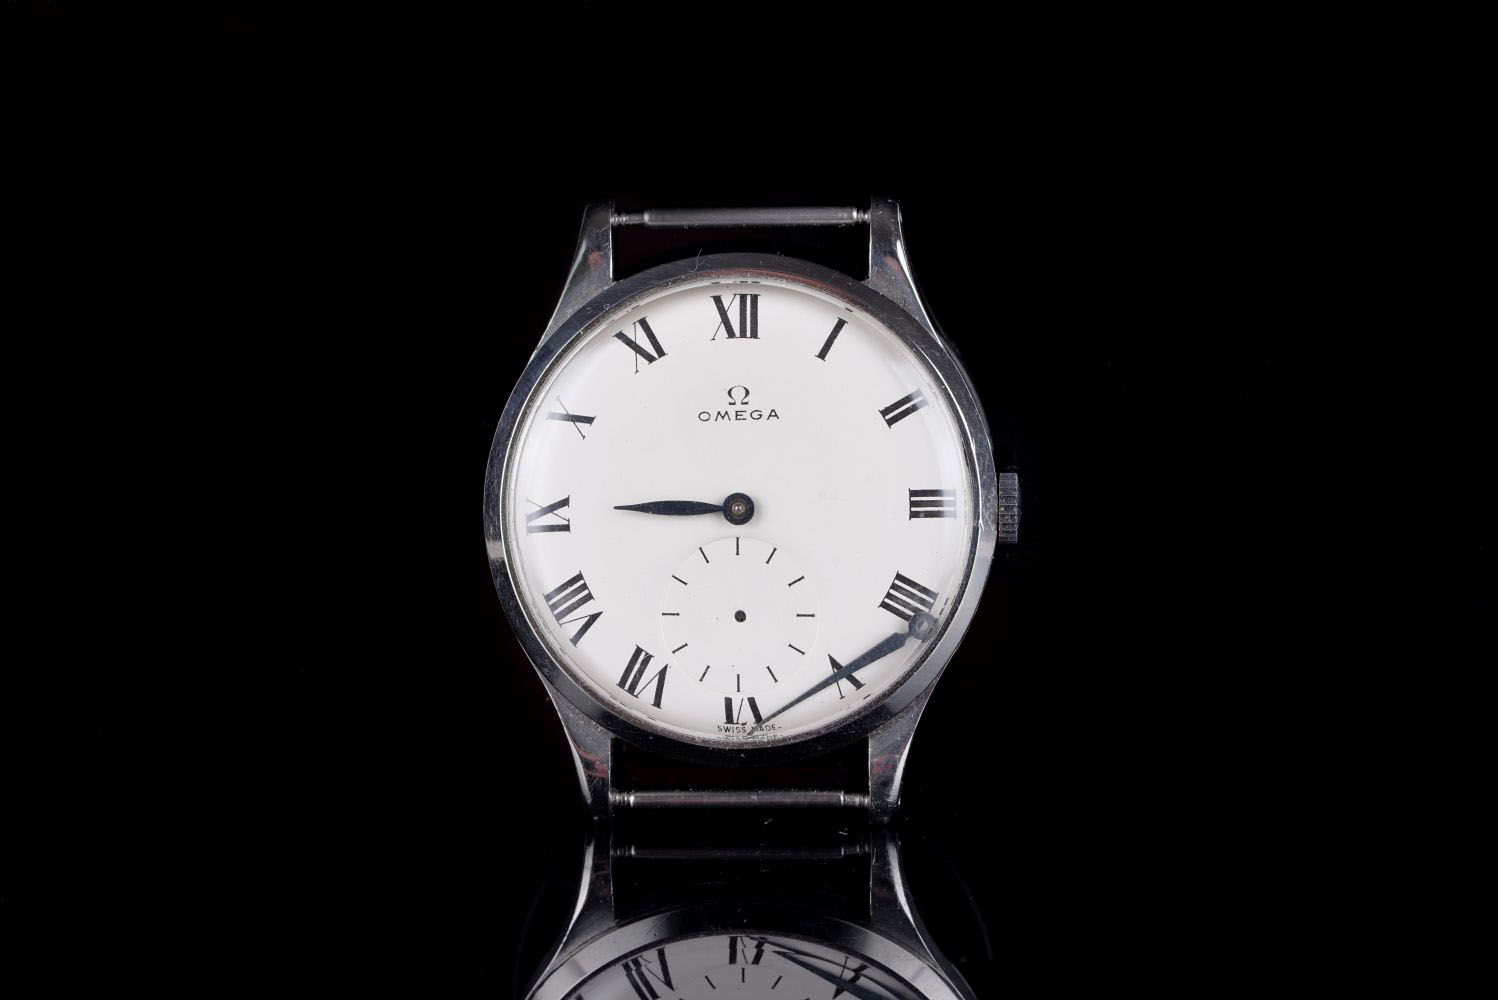 GENTLEMENS OMEGA OVERSIZE WRISTWATCH, circular off white dial with black roman numerals and gun